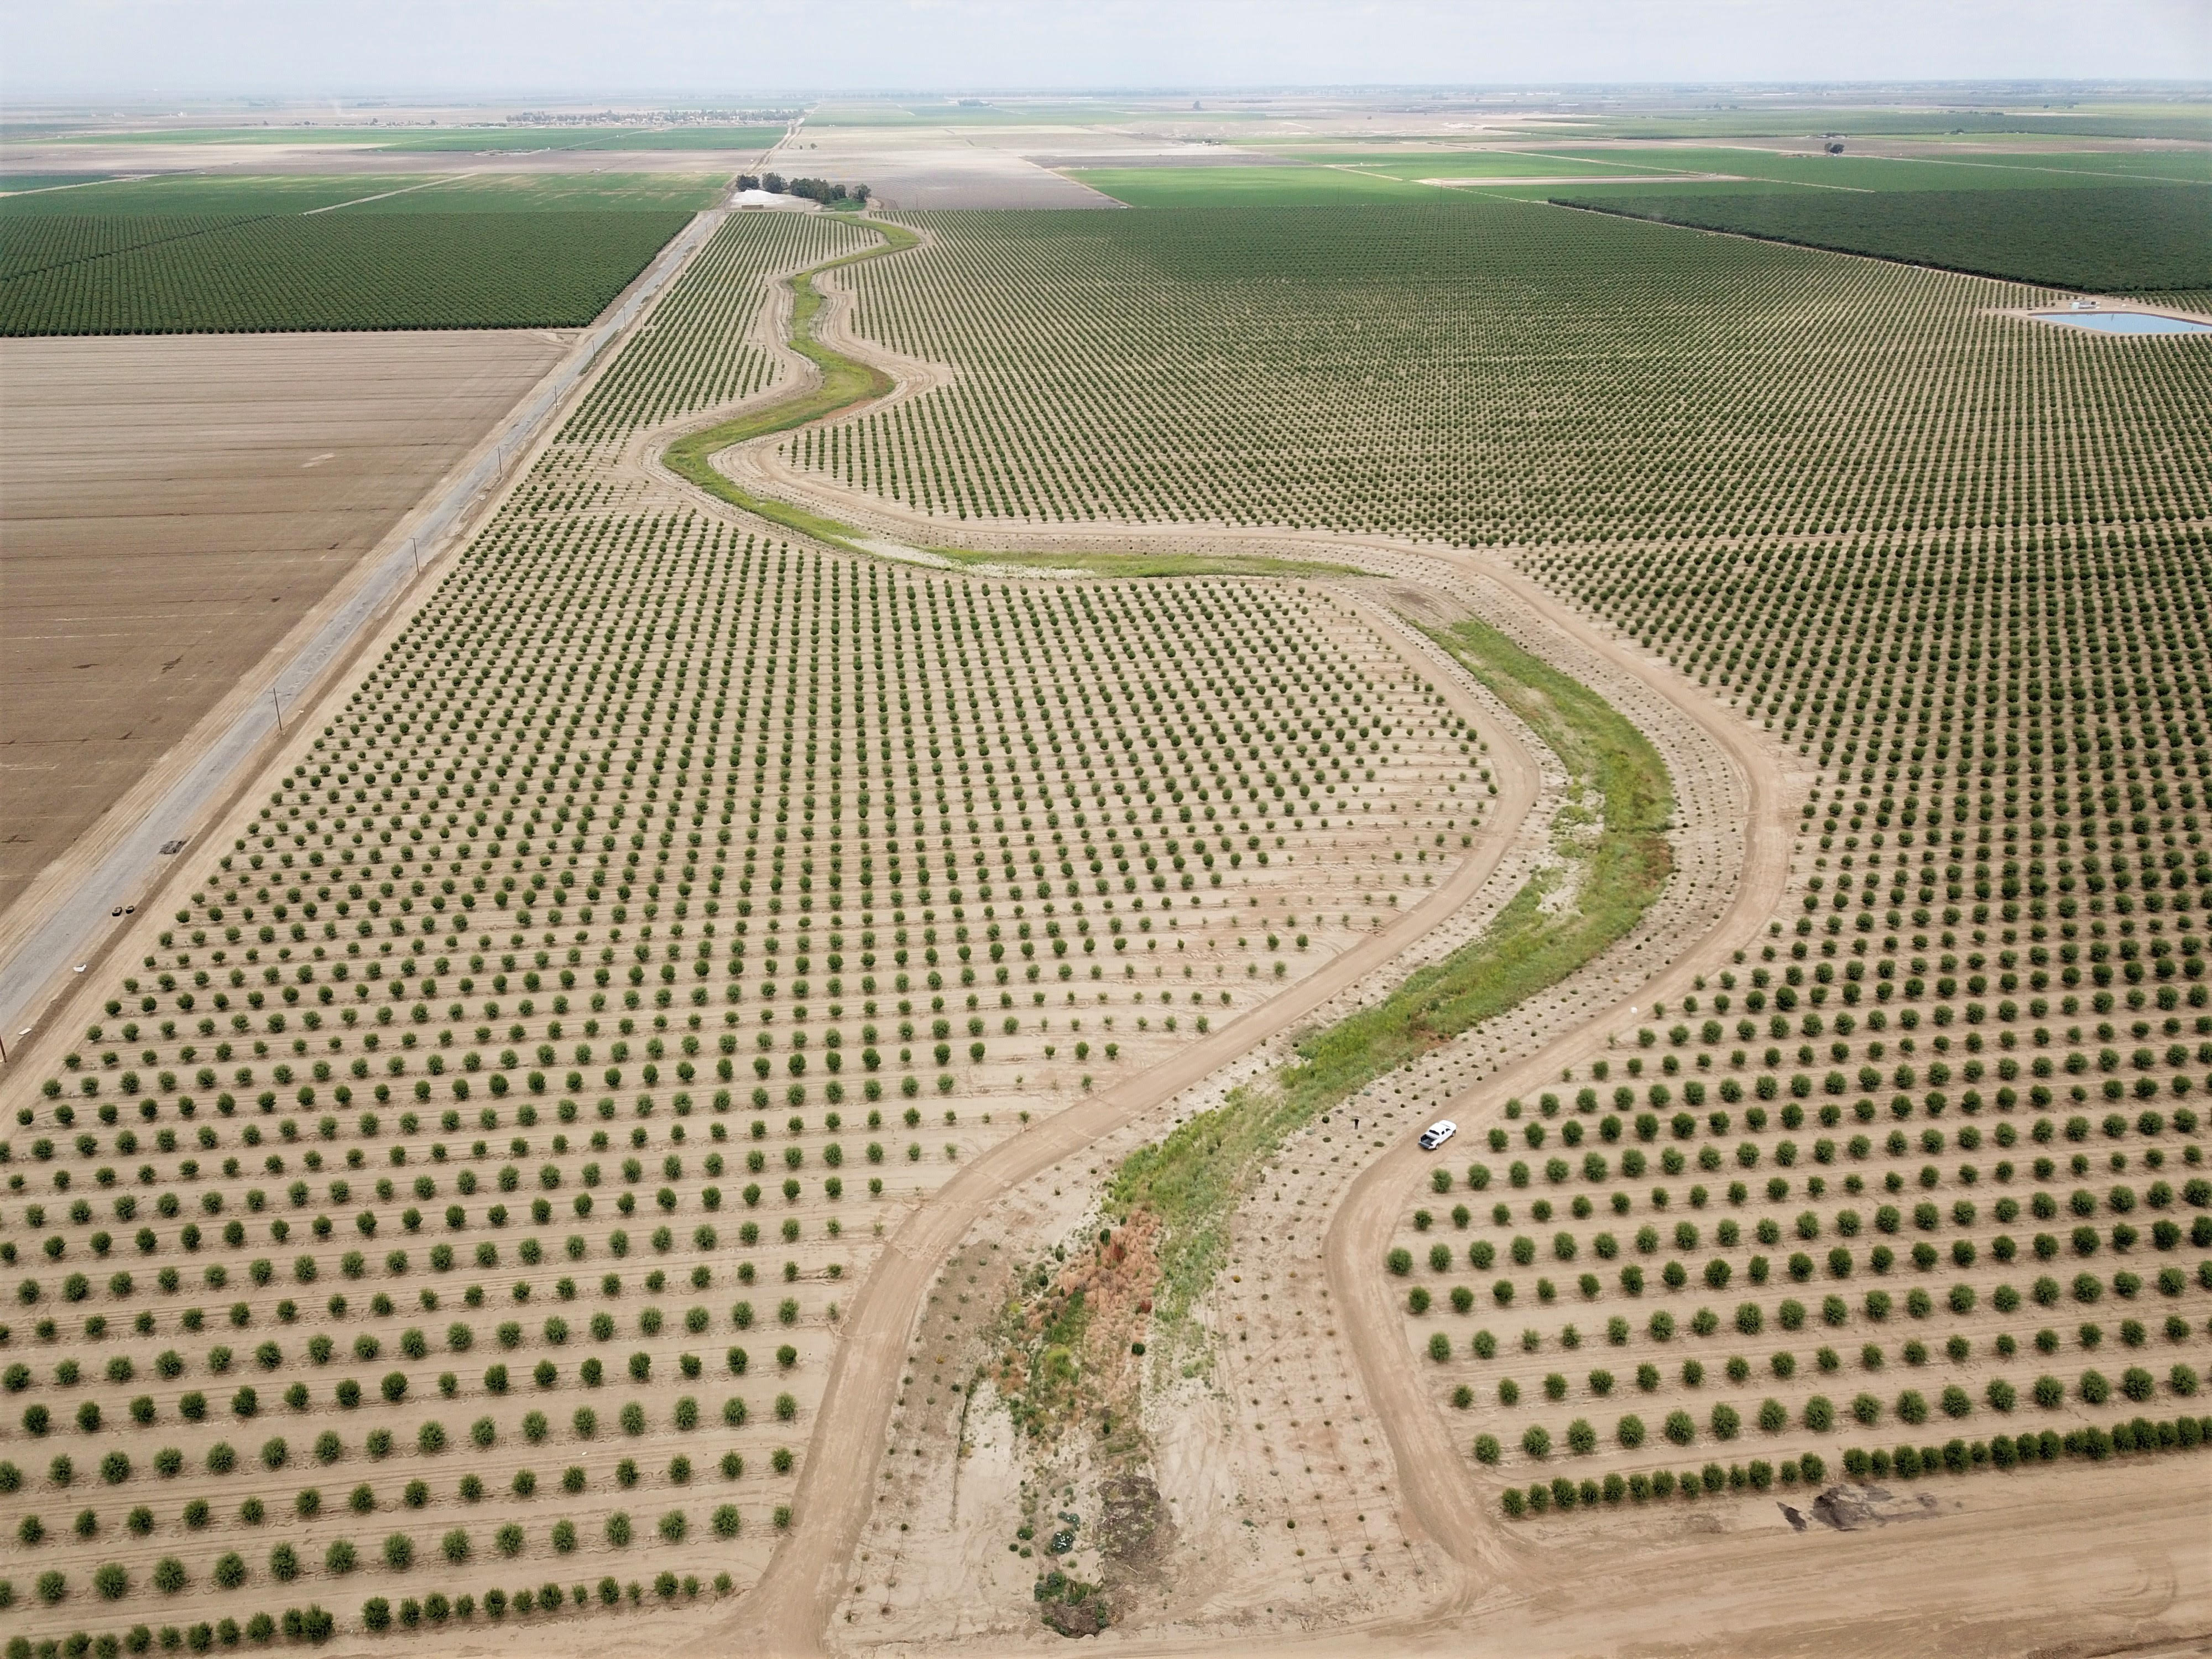 A landscape-scale aerial photo of California's Central Valley with pollinator meadows and hedgerows among sparse almond fields.